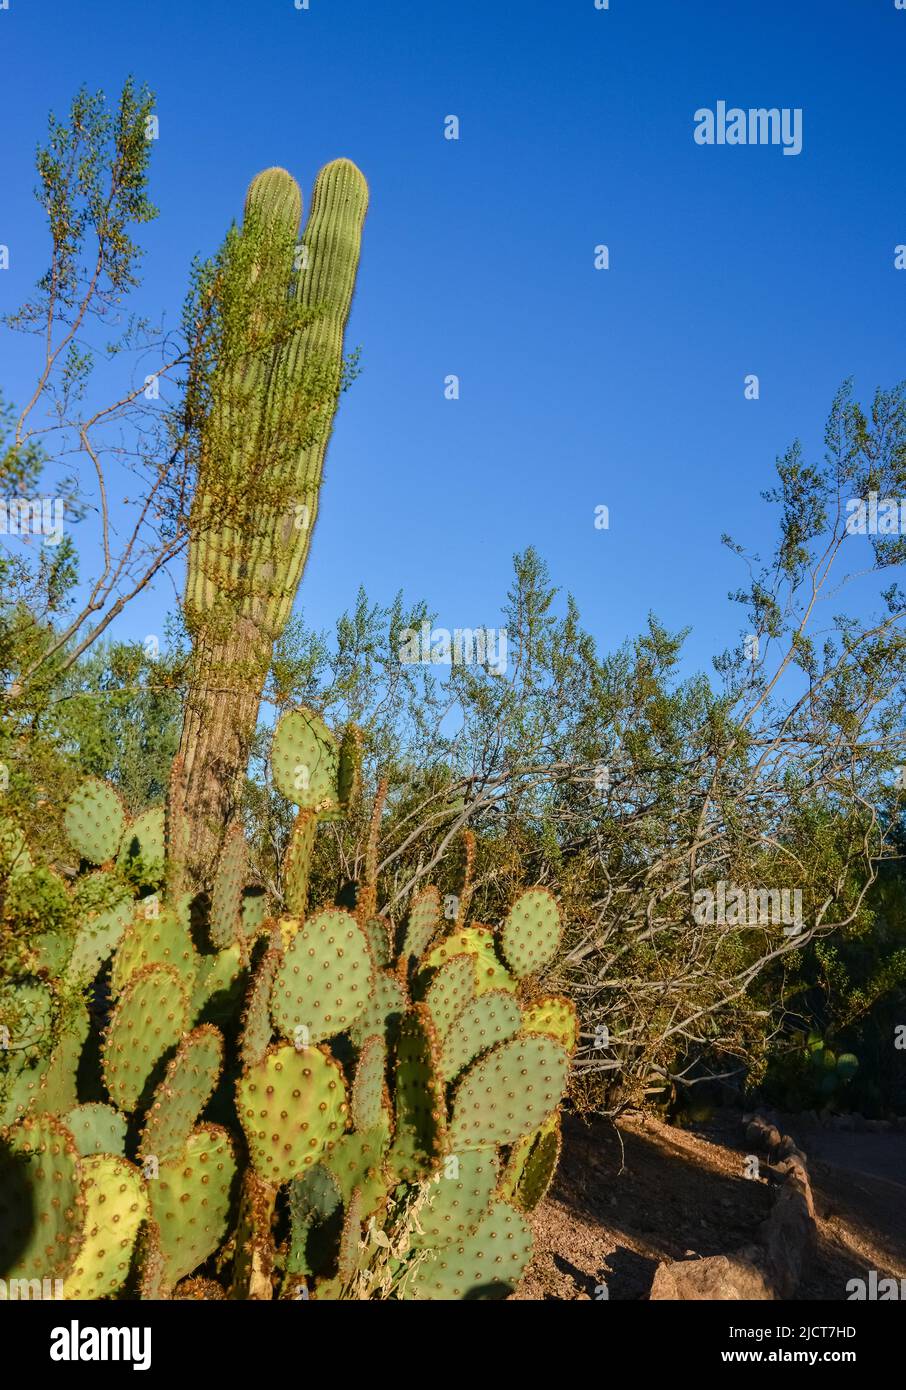 Barrel or fish hook cactus, found in the Sonora desert Stock Photo